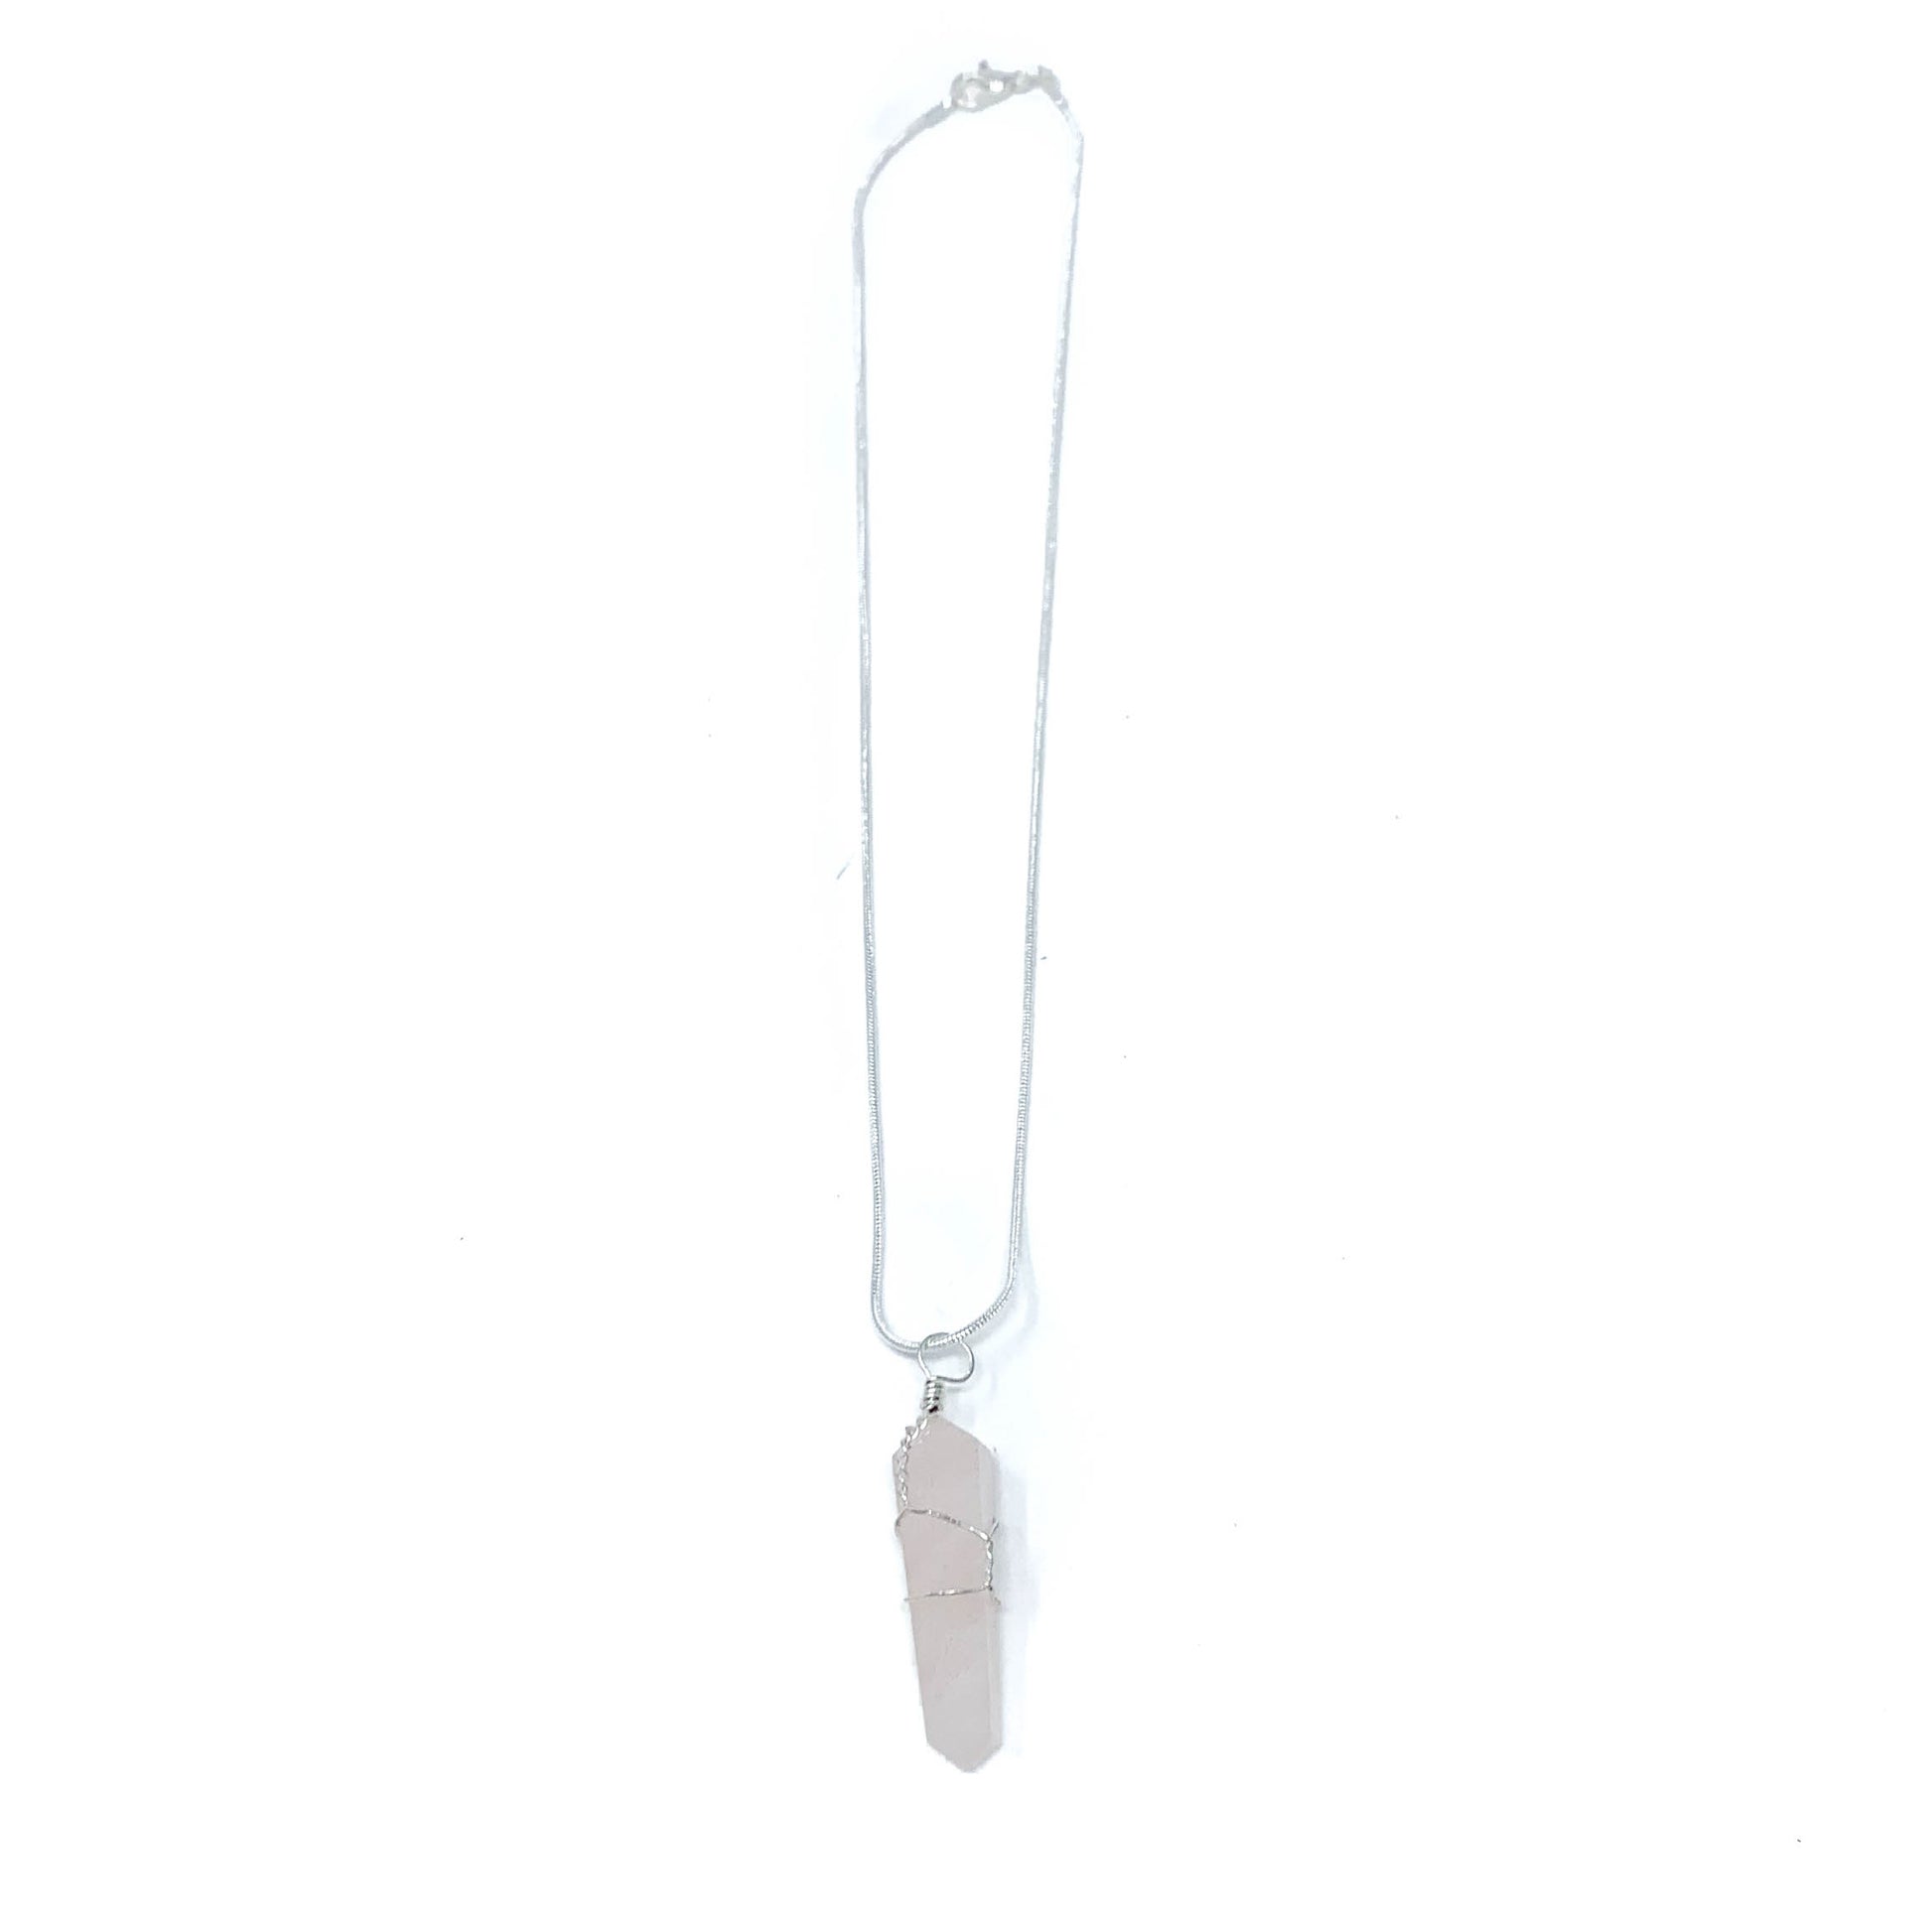 rose quartz healing crystal necklace on silver chain